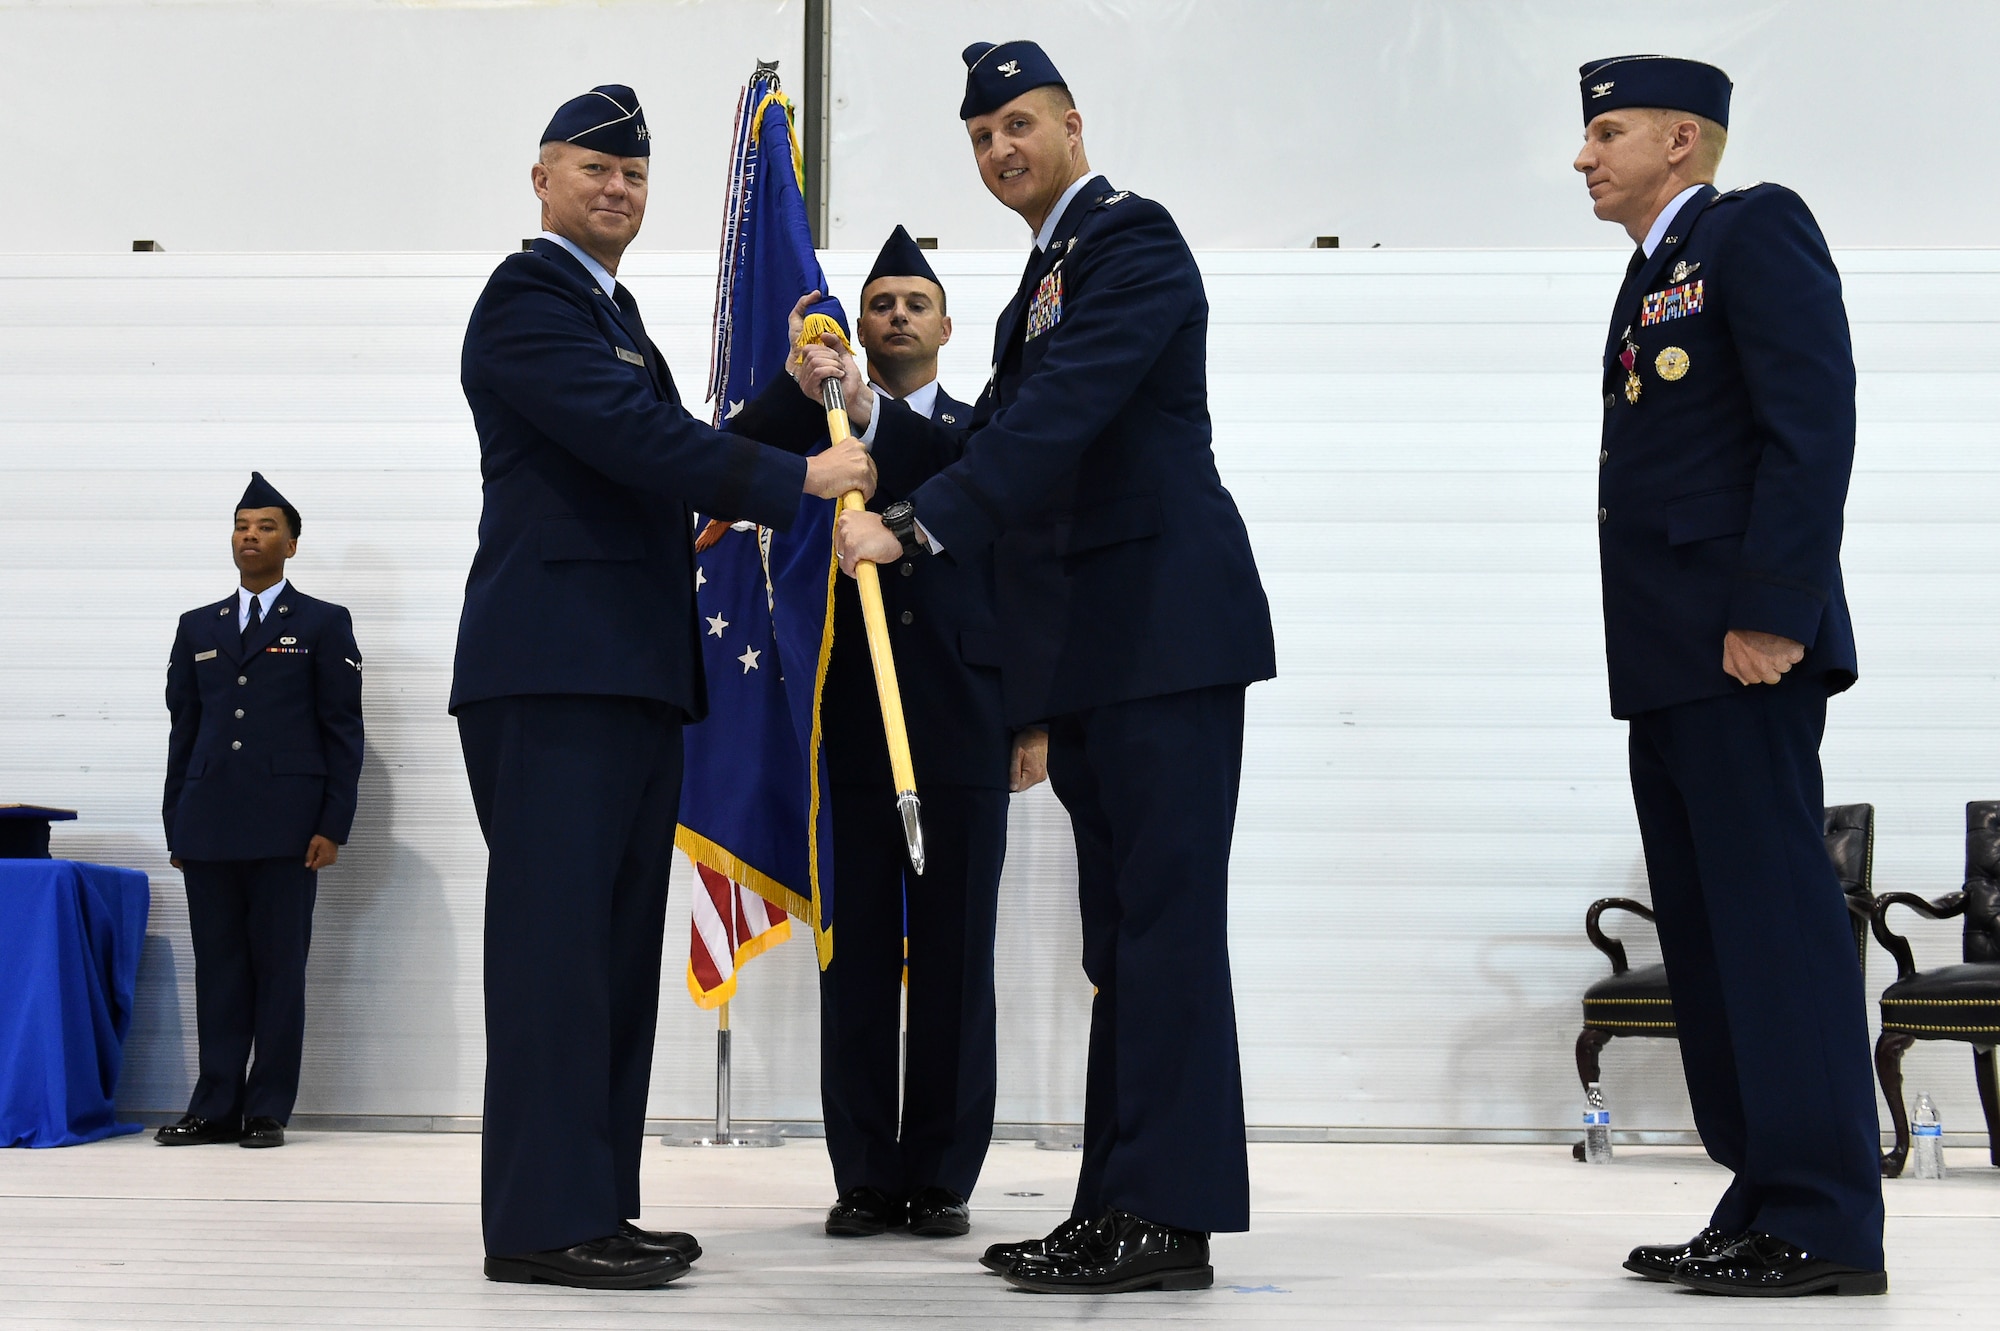 Col. Julian Cheater assumes command of the 432nd Wing from Lt. Gen. Mark Kelly, 12 Air Force commander July 6, 2017, at Creech Air Force Base, Nev. Going forward, Col. Cheater’s priorities are: winning today’s war while preparing for contested environment, developing our Airmen, strengthening our extended Hunter family and empowering our people as they innovate the remotely piloted aircraft community. (U.S. Air Force photo/Airman 1st Class James Thompson)